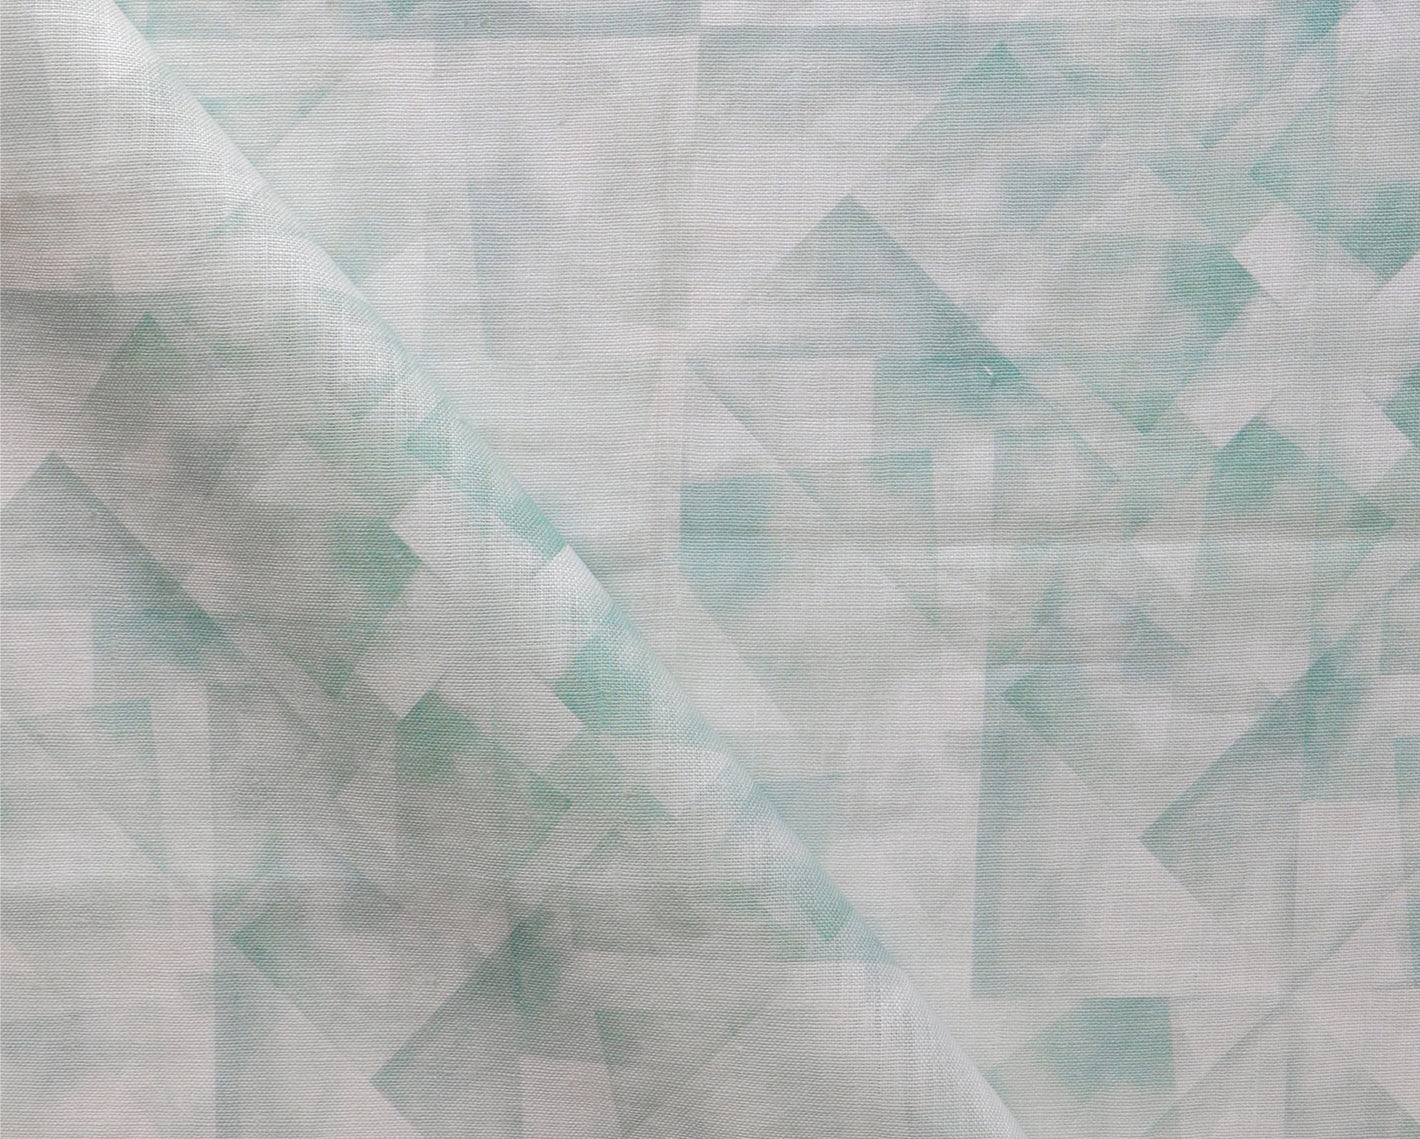 A close up of a green and white fabric